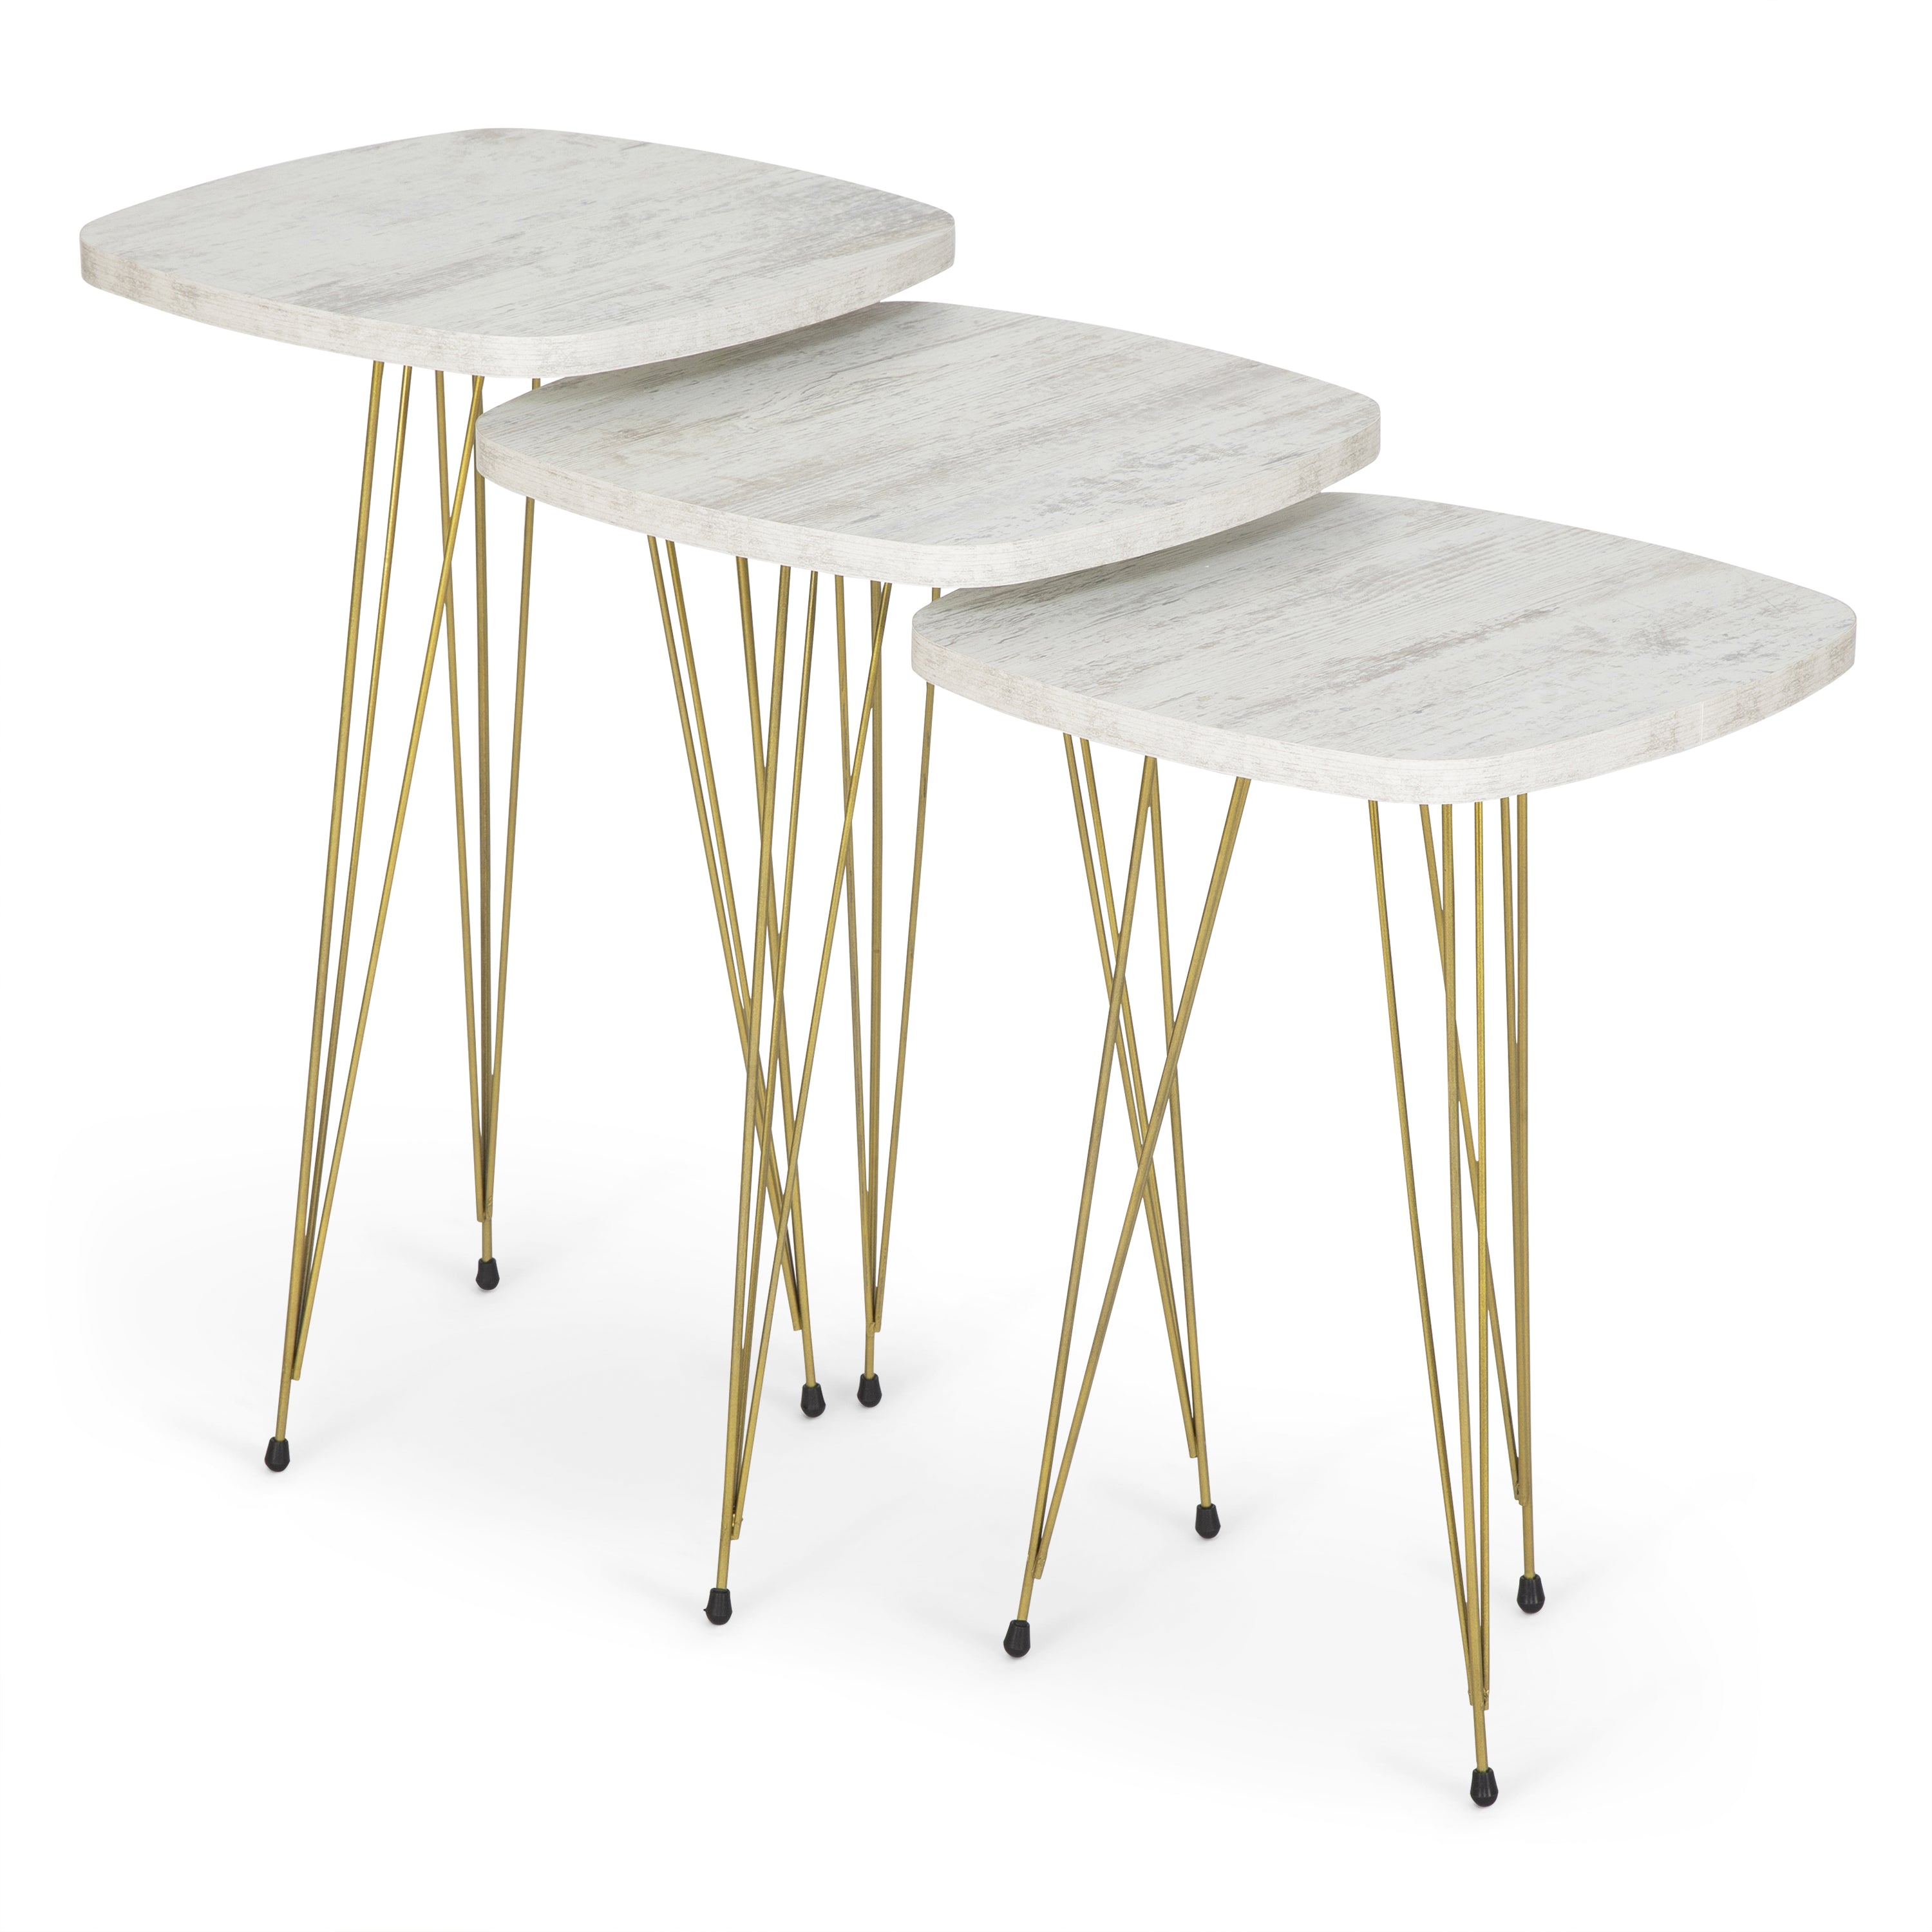 Crystal Set of 3 Square Side Tables - White Marble & Gold